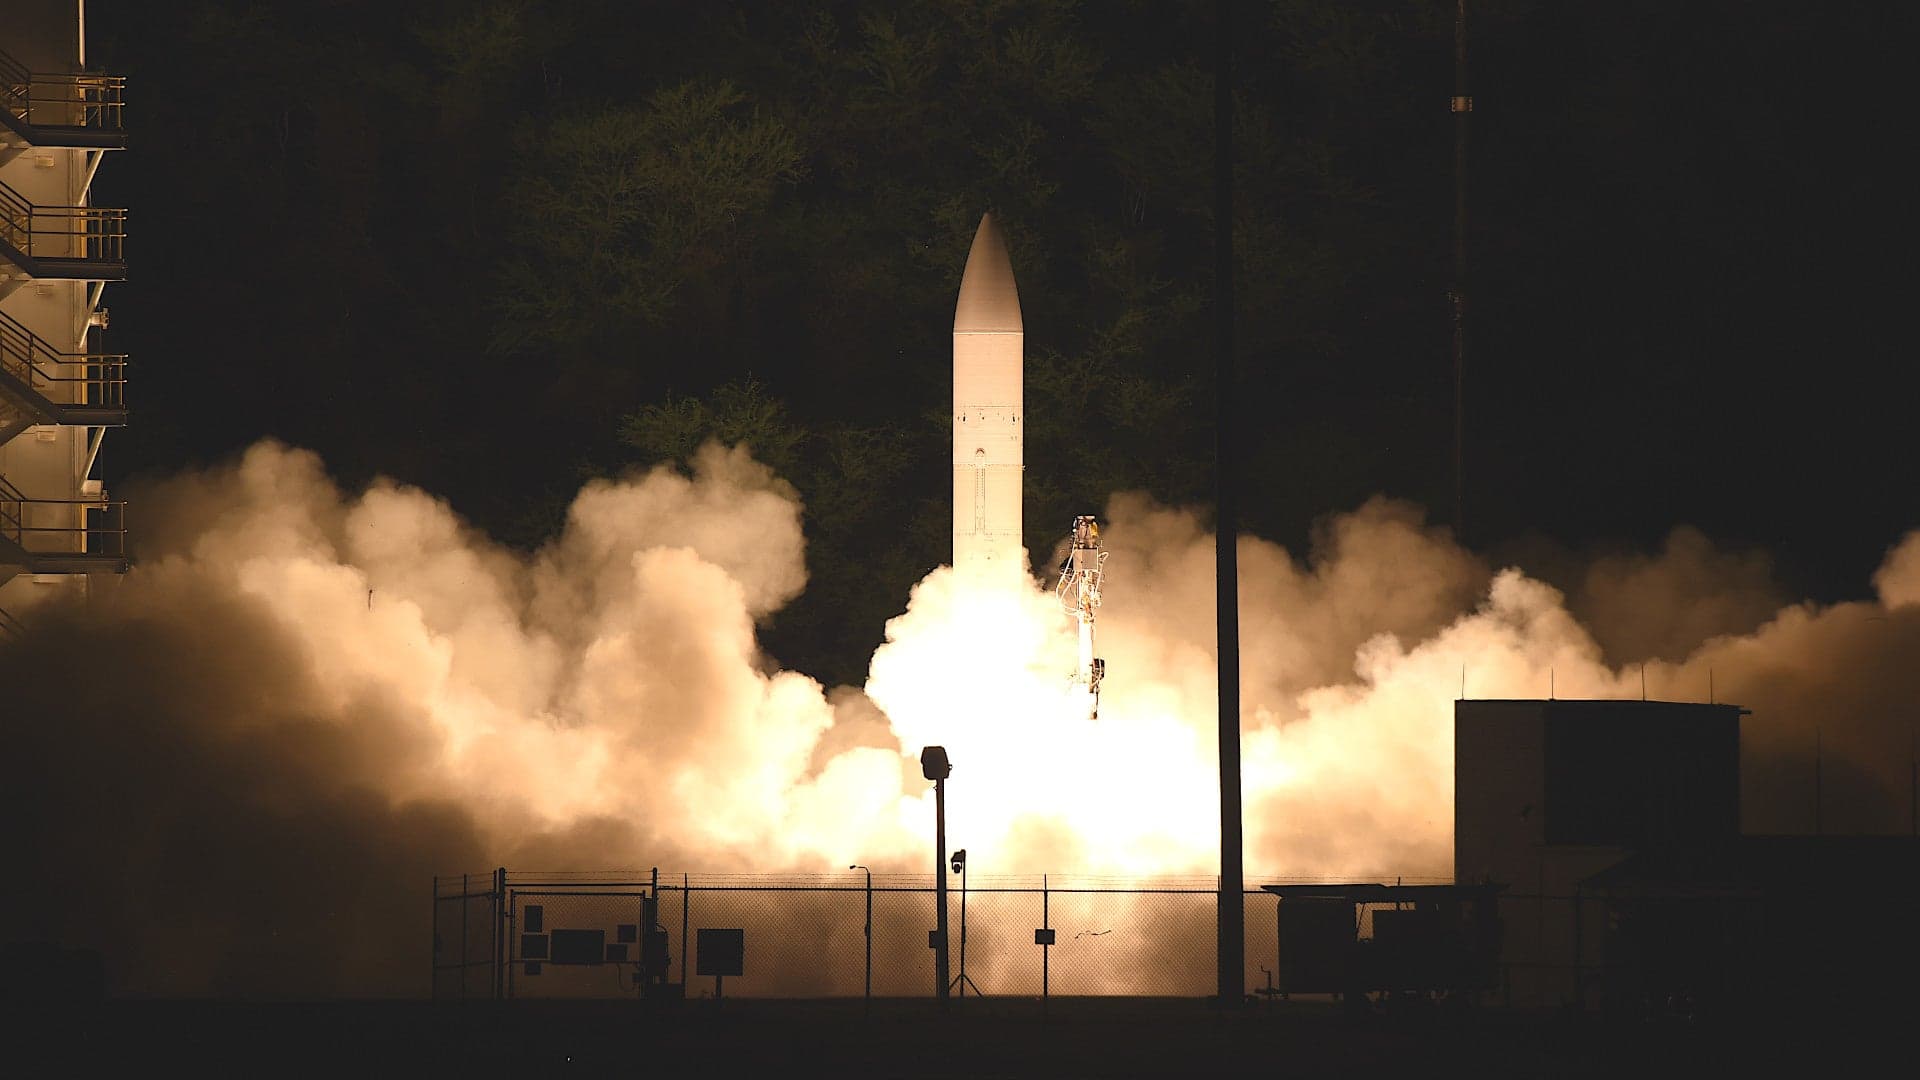 The Army And Navy Have Conducted The First Joint Test Of Their New Hypersonic Weapon